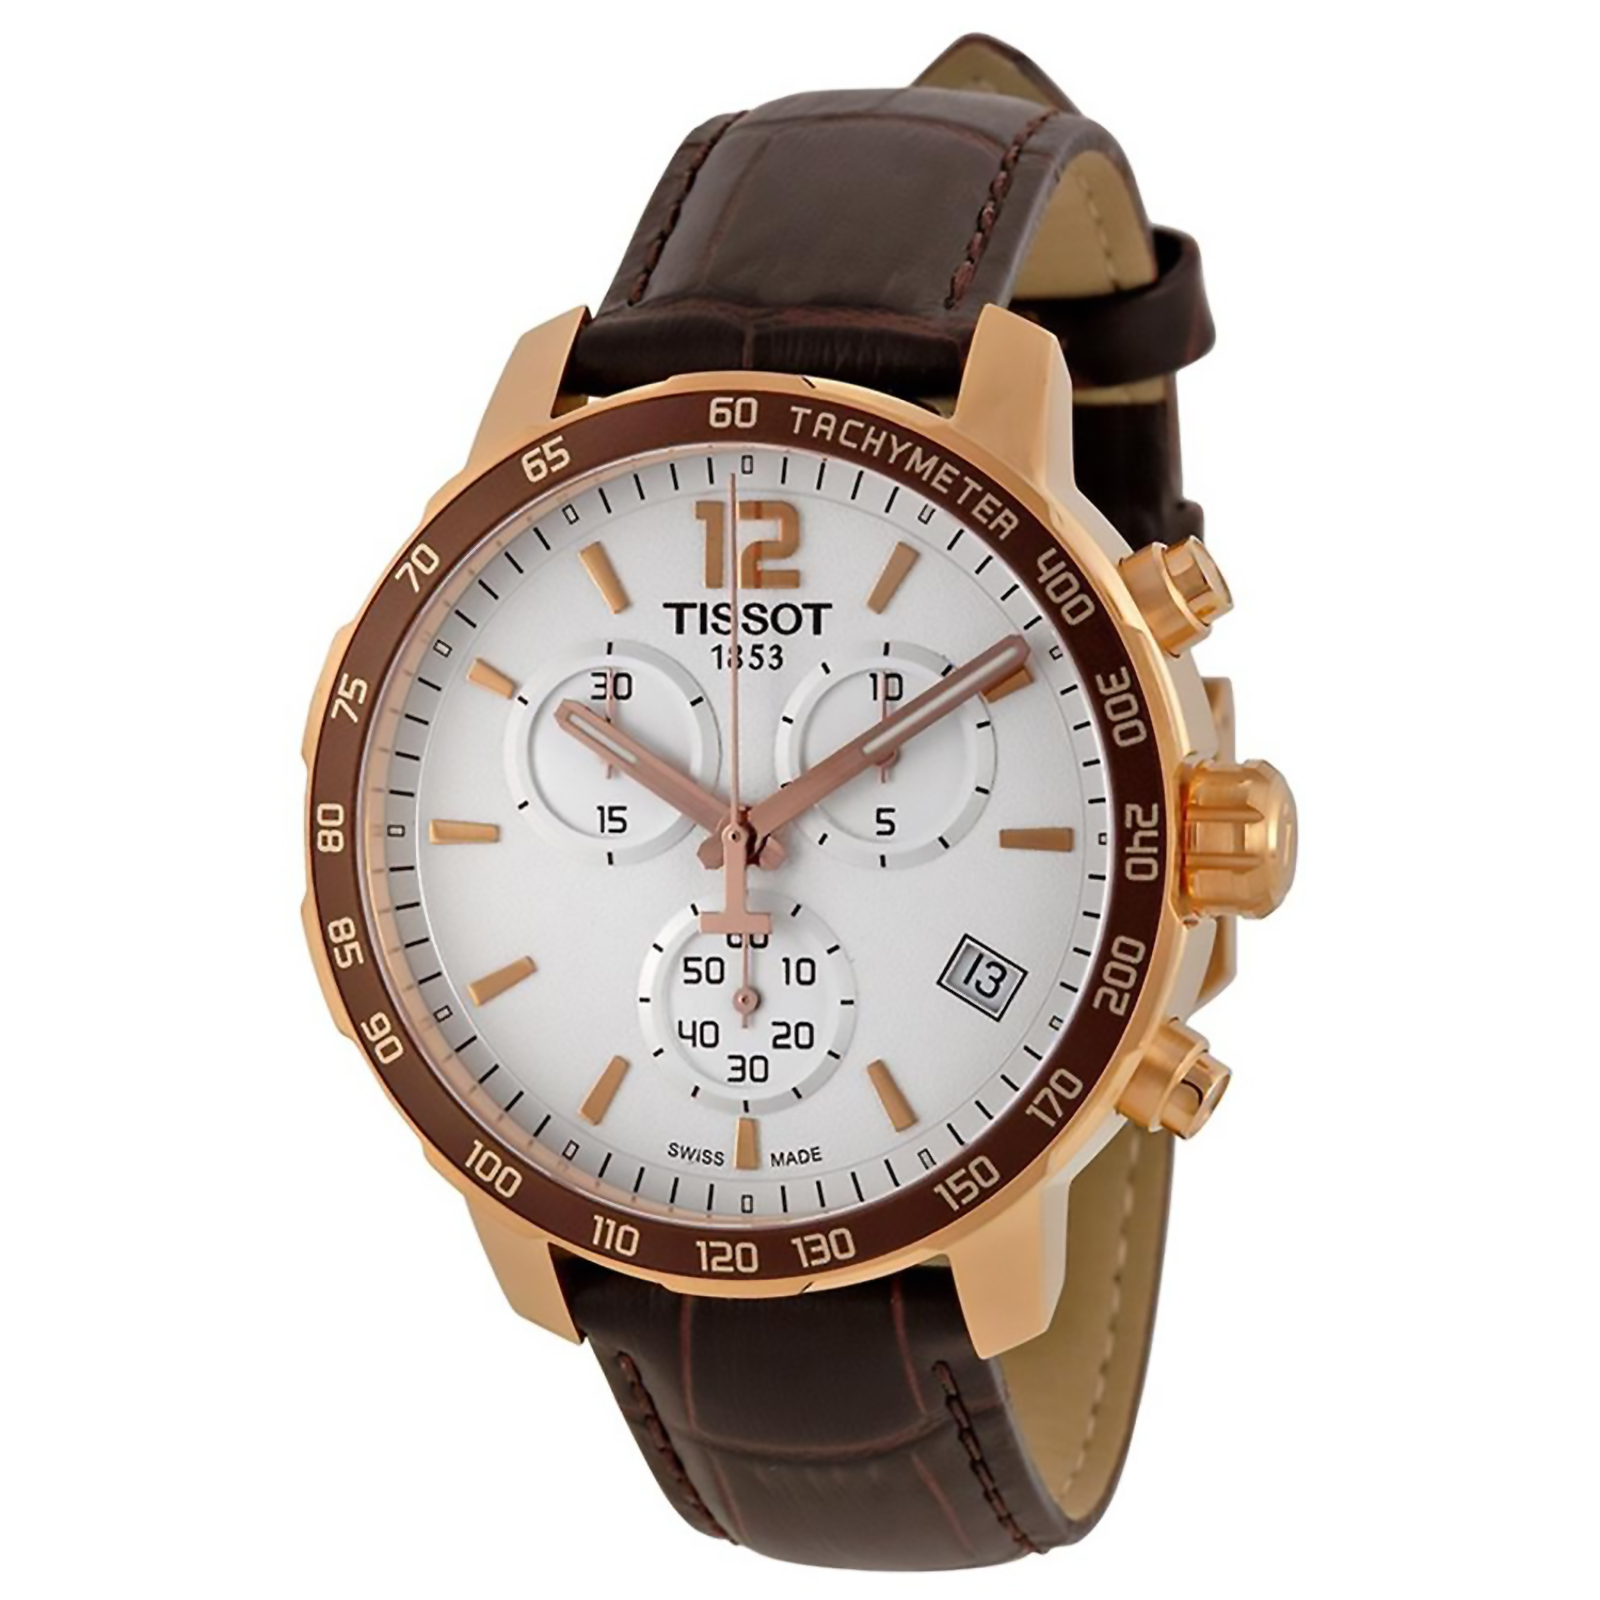 Tissot T0954173603700 Men's Quickster Leather Analog Watch - Brown